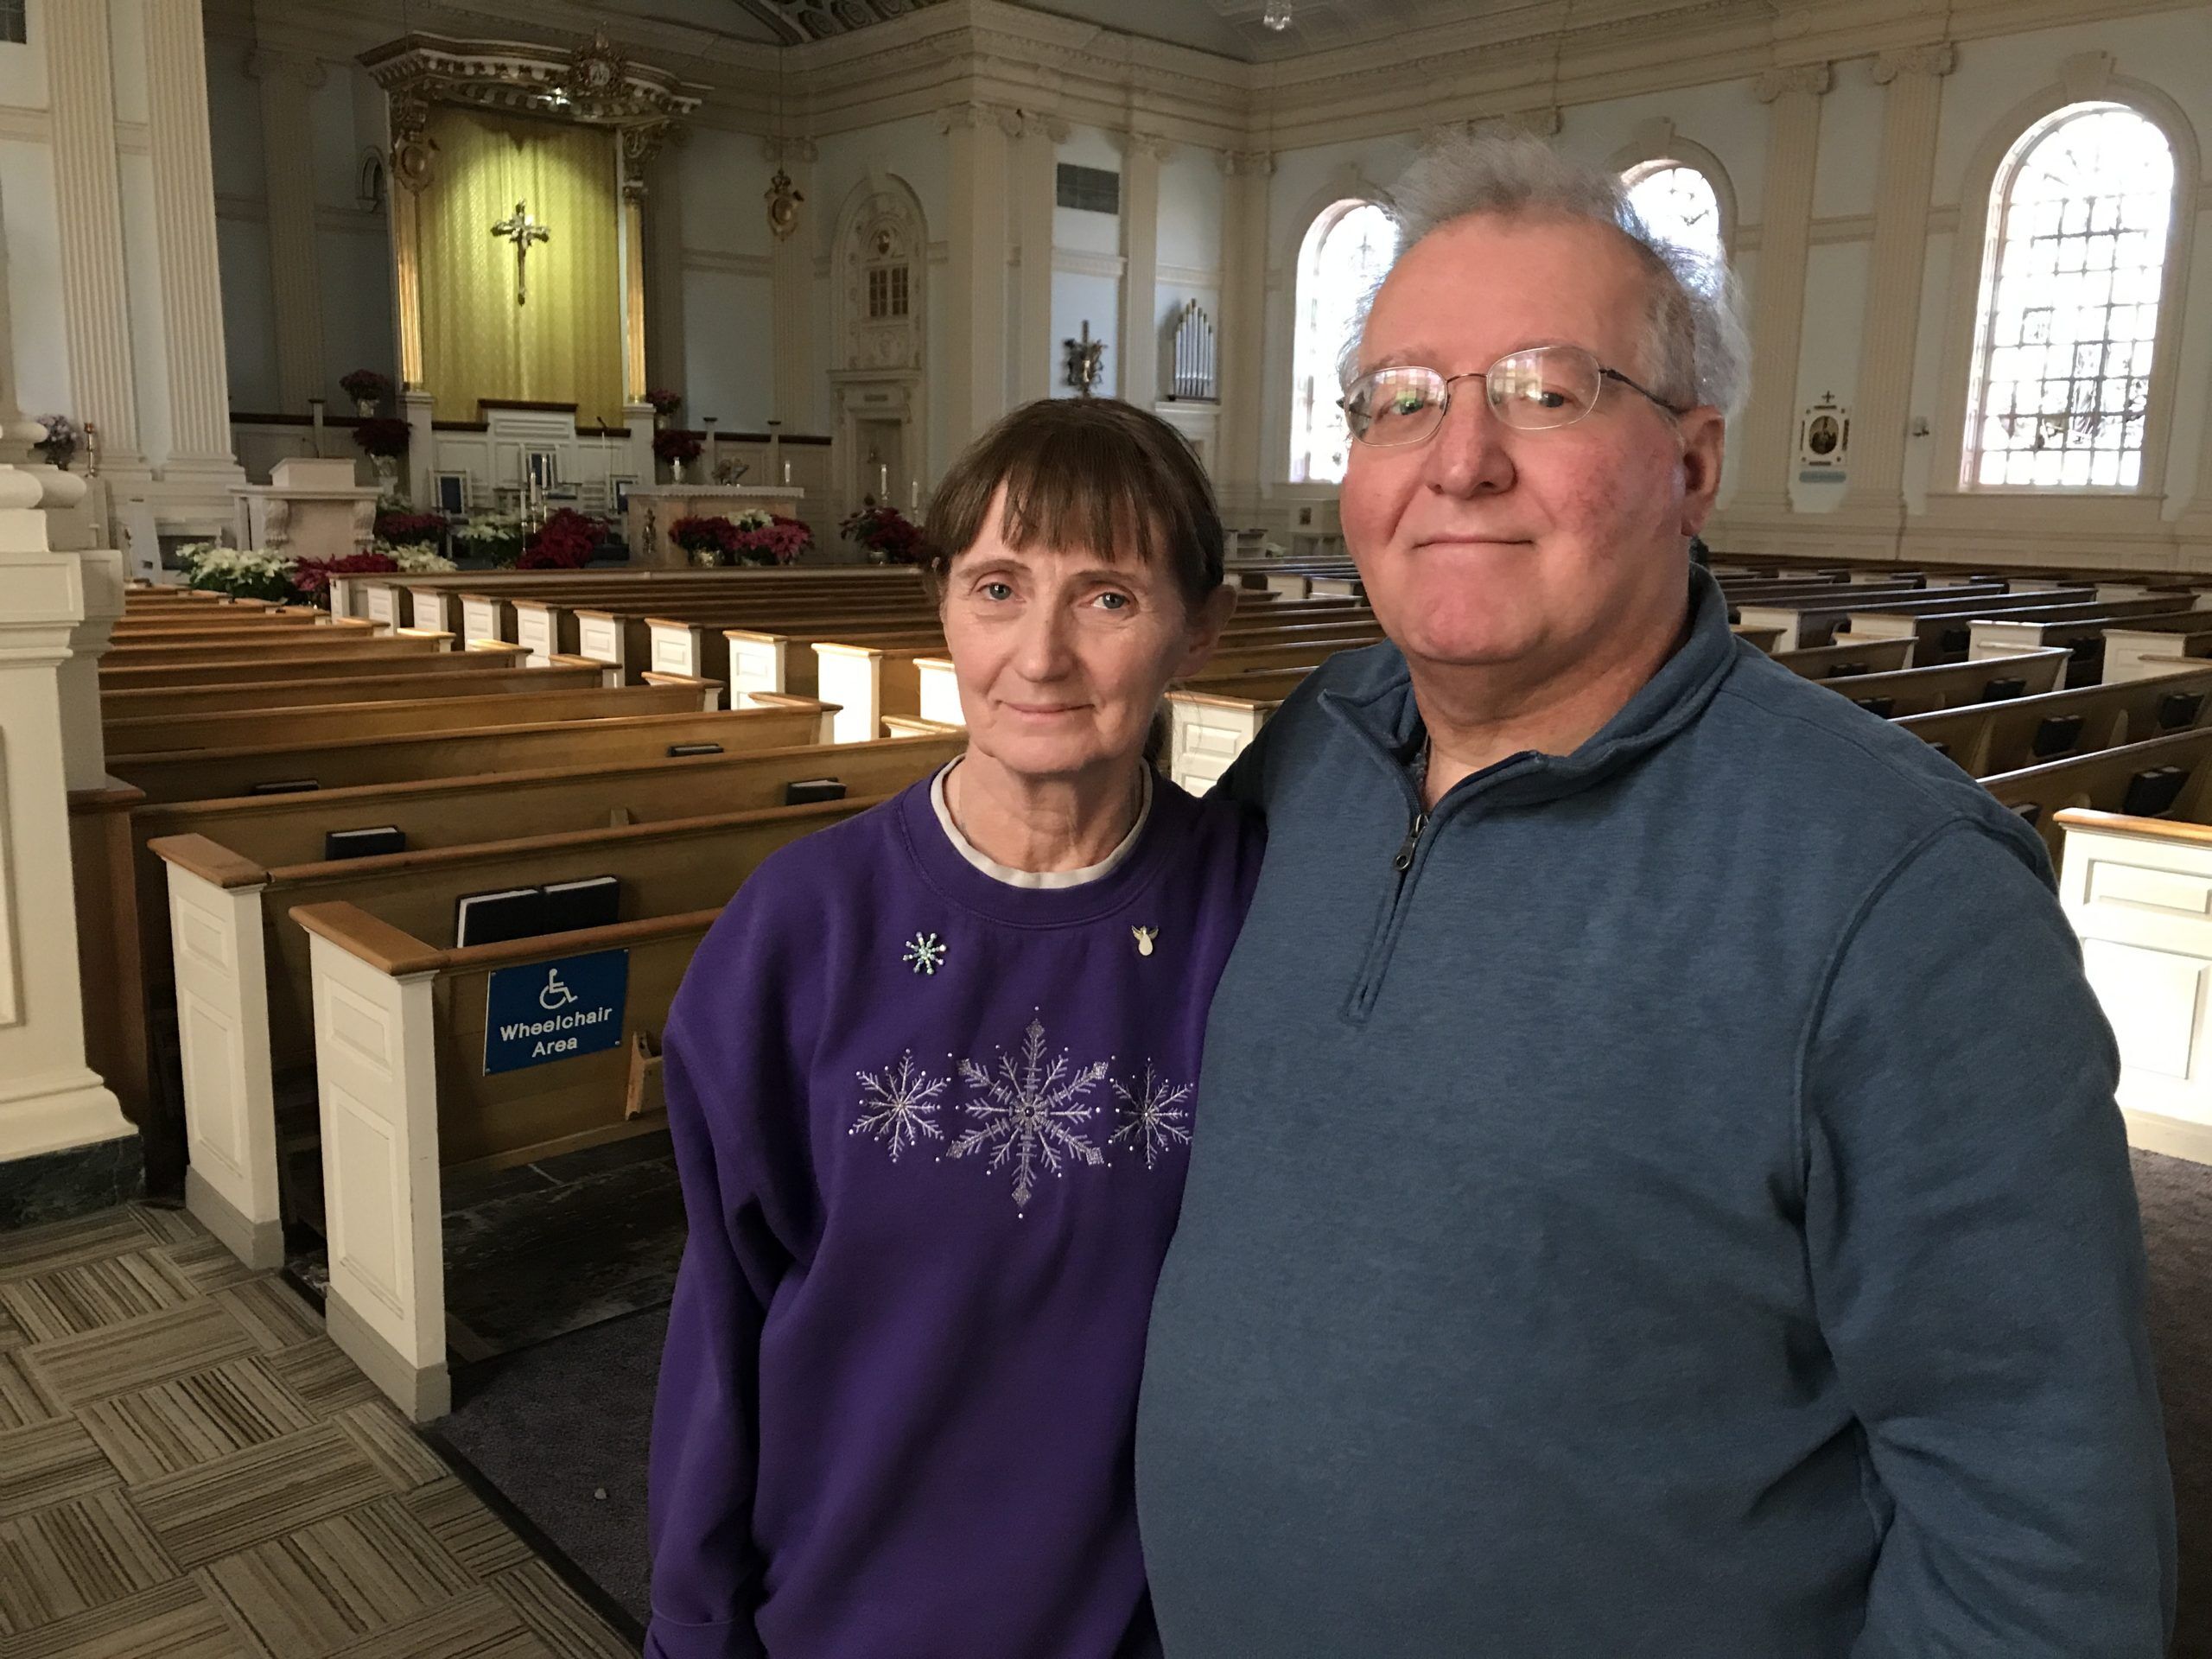 Bill and Marianne Mackey are pictured at Queen of Peace Church in North Arlington where the Mackeys serve and worship. (Photo by Jai Agnish/Archdiocese of Newark)